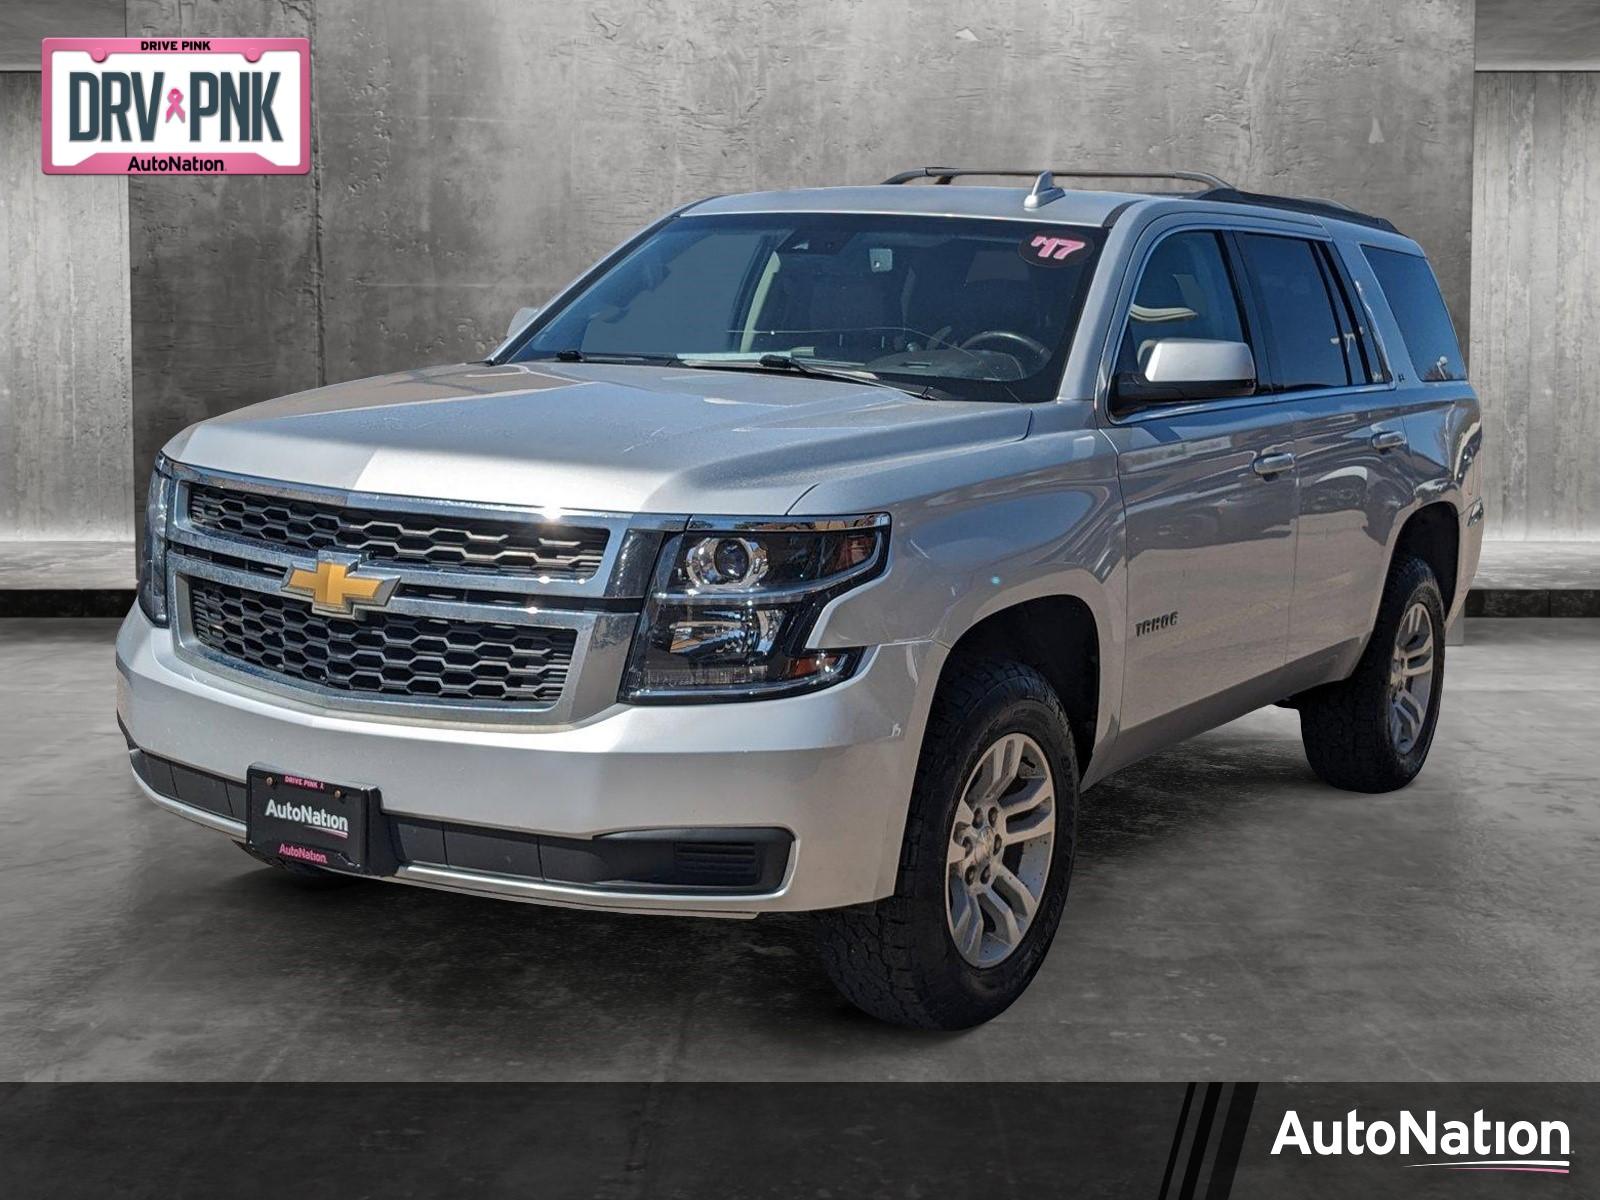 2017 Chevrolet Tahoe Vehicle Photo in LONE TREE, CO 80124-2750